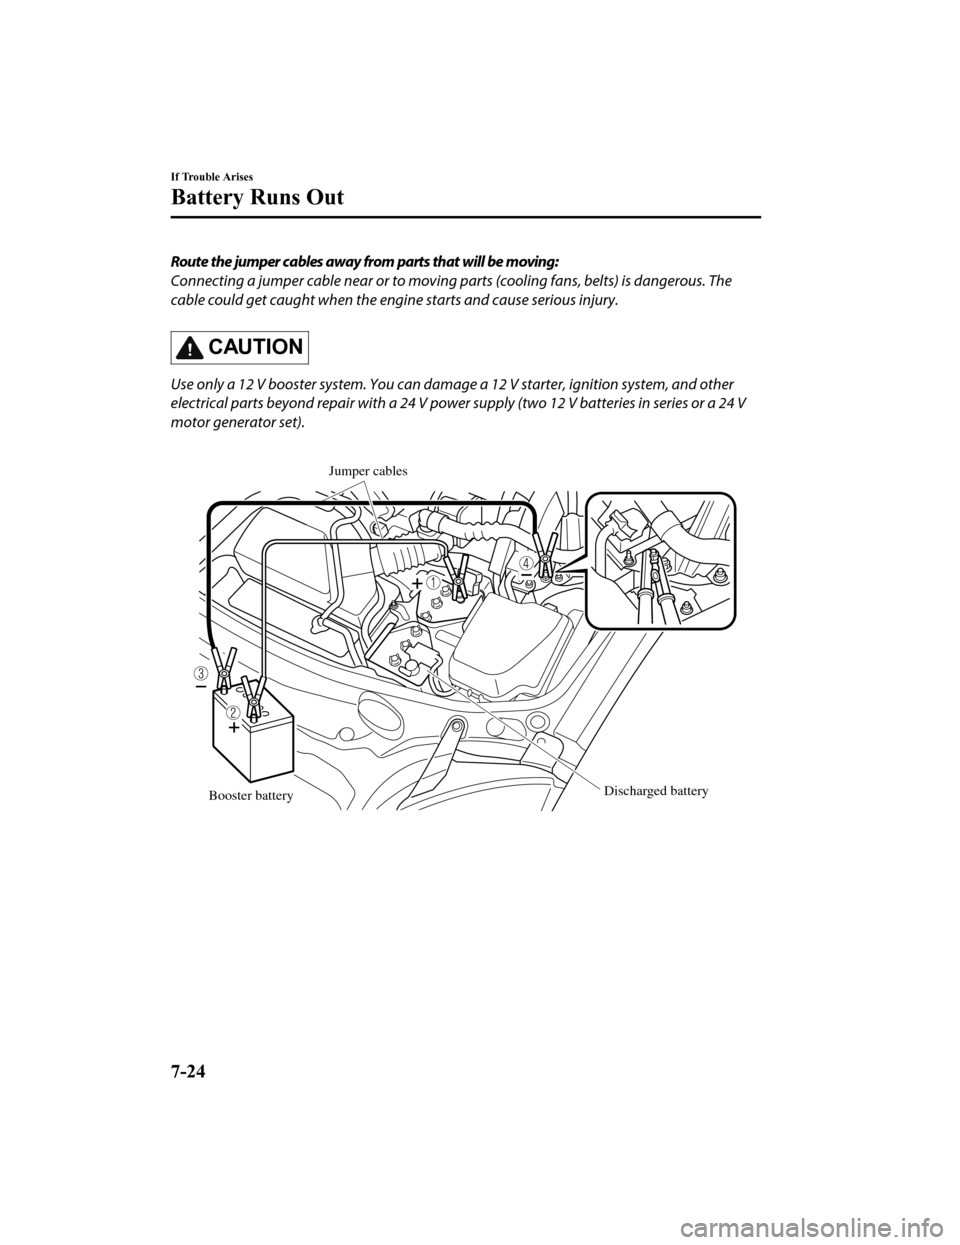 MAZDA MODEL MX-5 2018  Owners Manual (in English) Route the jumper cables away from parts that will be moving:
Connecting a jumper cable near or to moving parts (cooling fans, belts) is dangerous. The
cable could get caught when the engine starts and